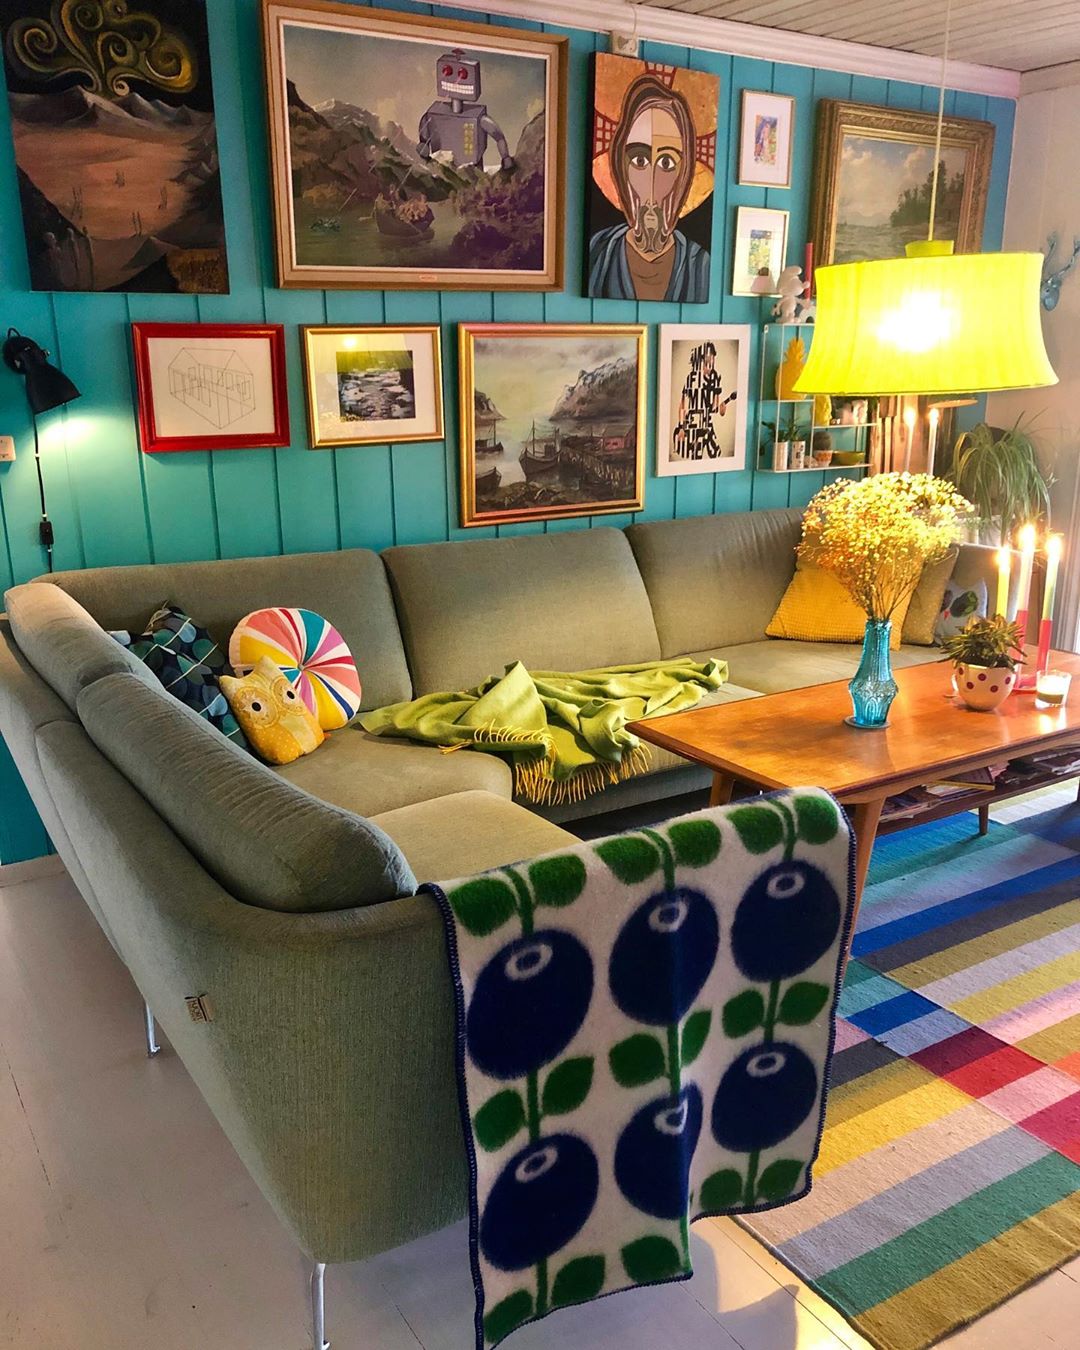 Blue living room with green couch and patterned blanket. Photo by Instagram user @polkadotgrid